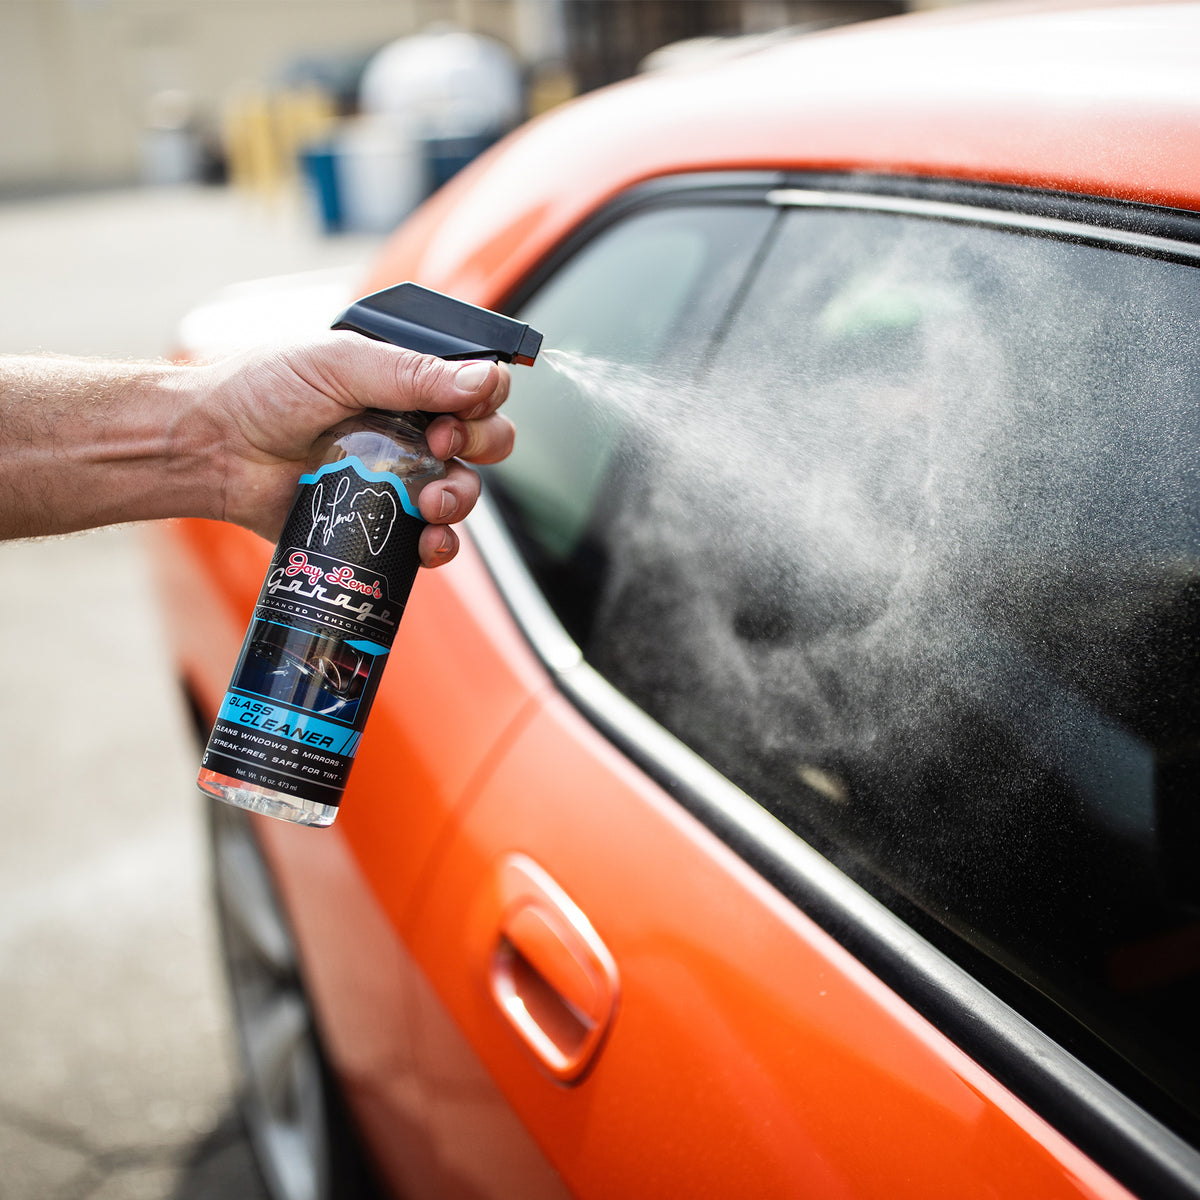 Clarity - Car Glass Cleaner & Ceramic Protection